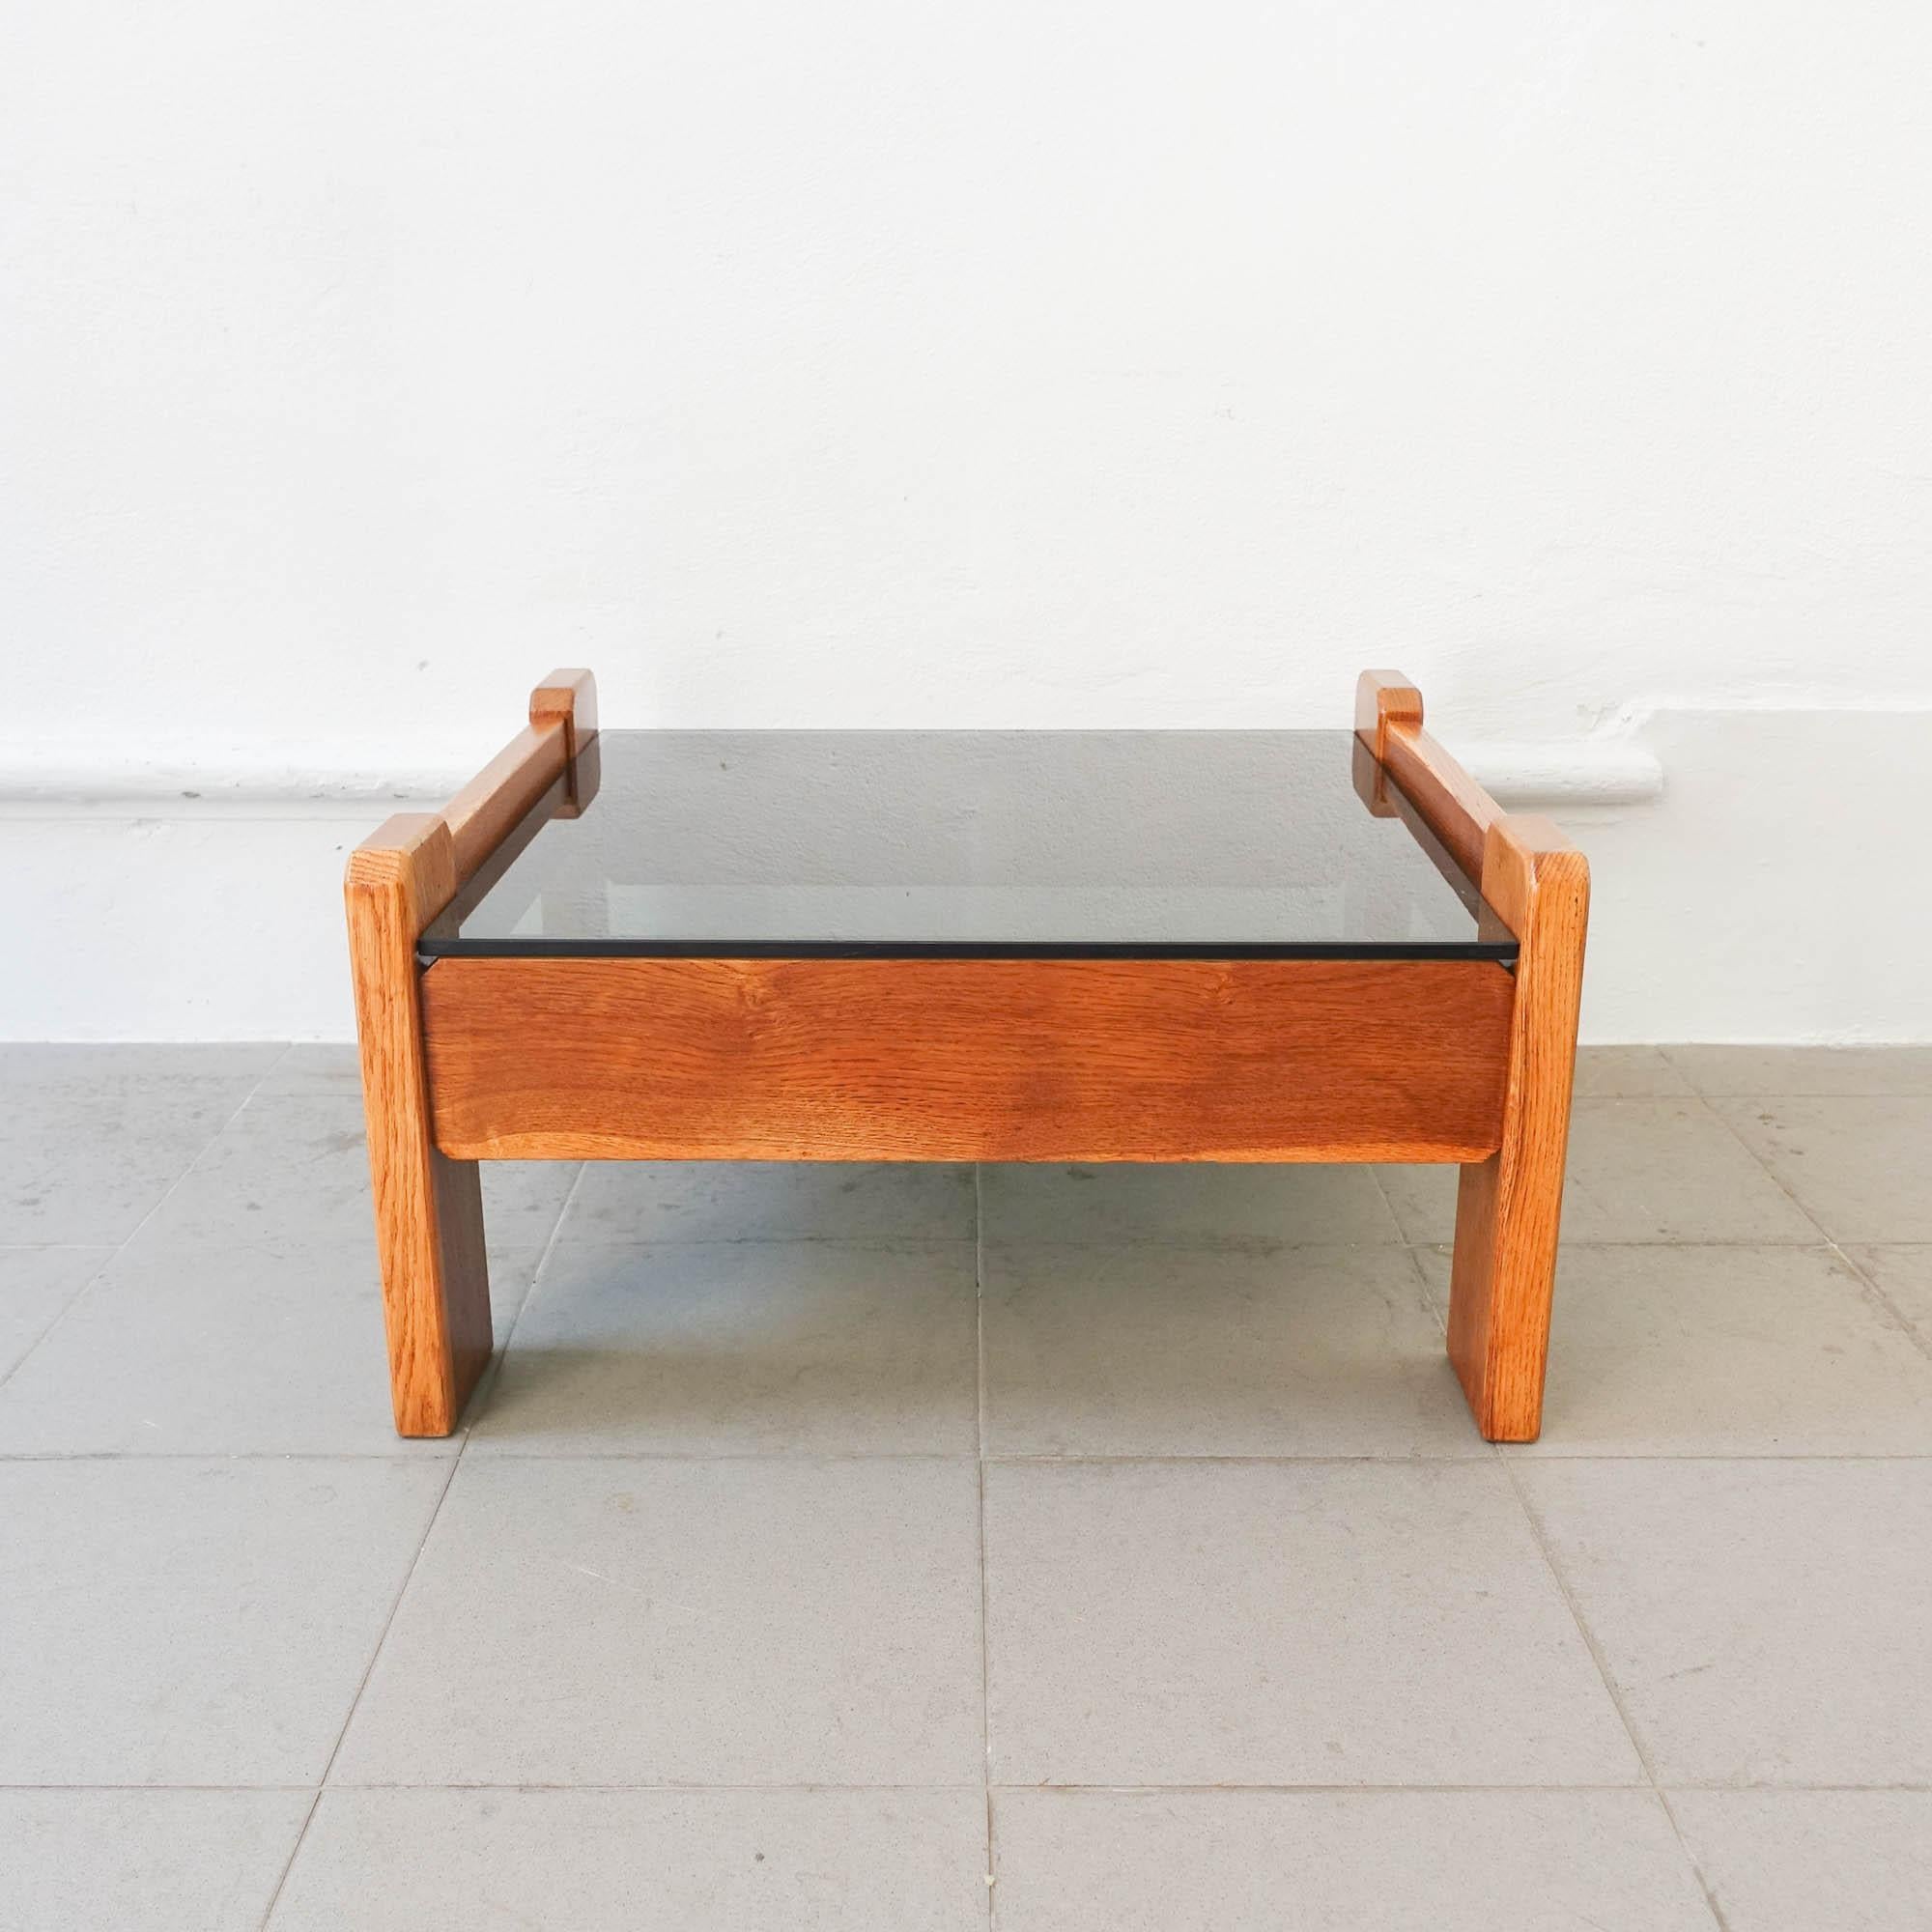 Late 20th Century Portuguese Coffee Table in French Oak by Eduardo Afonso Dias, 1970's For Sale